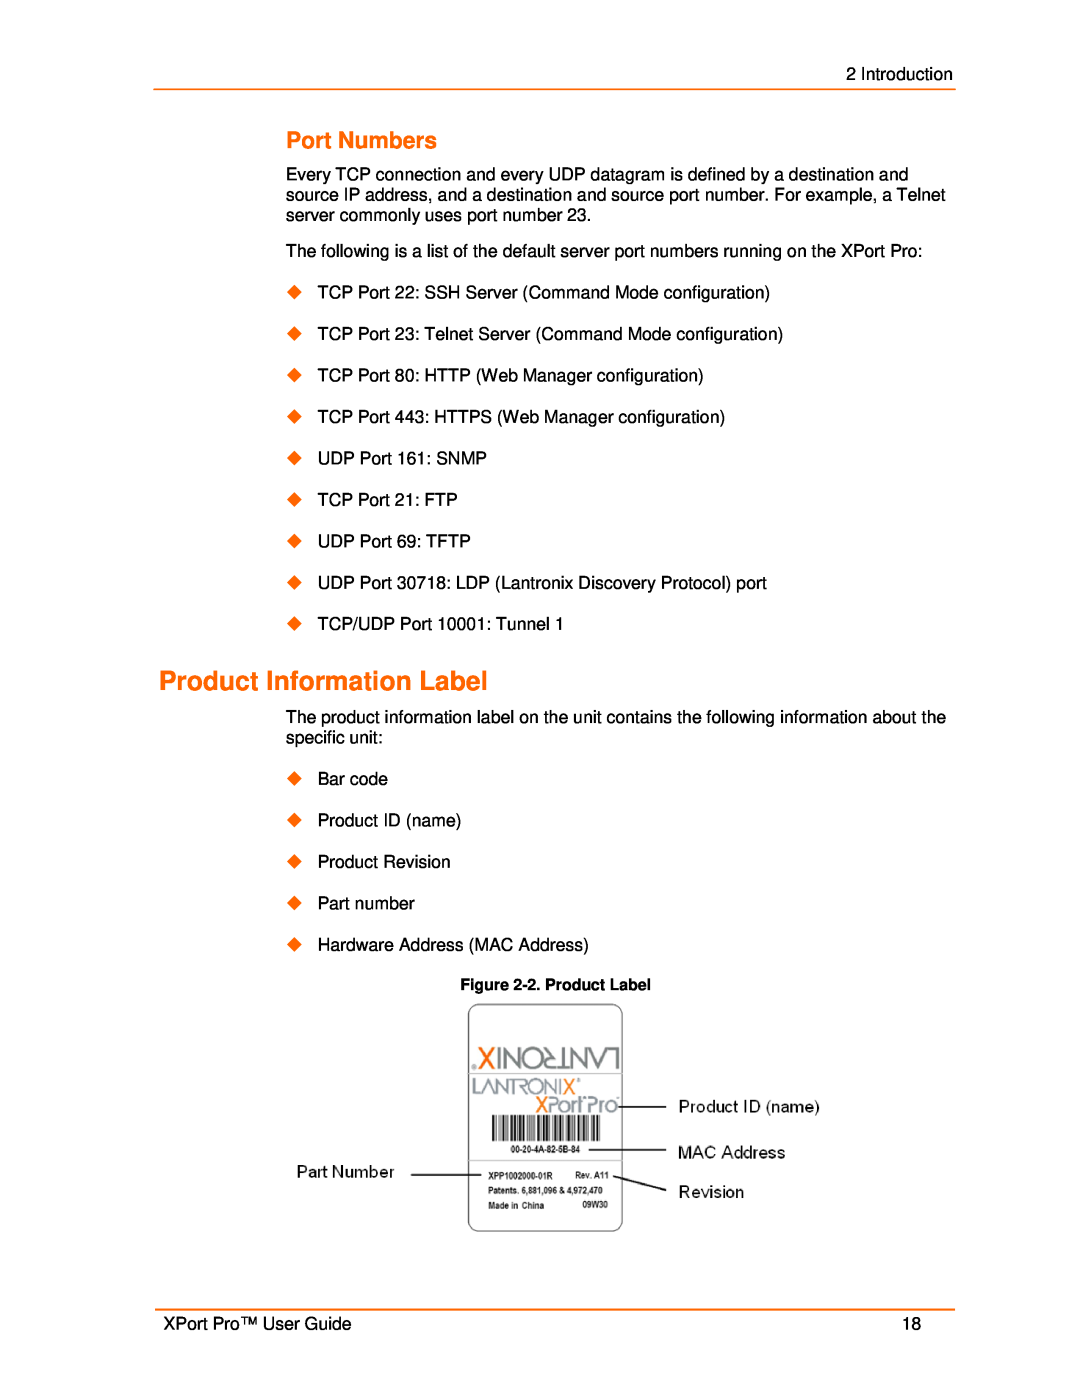 Lantronix 900-560 manual Product Information Label, Port Numbers 